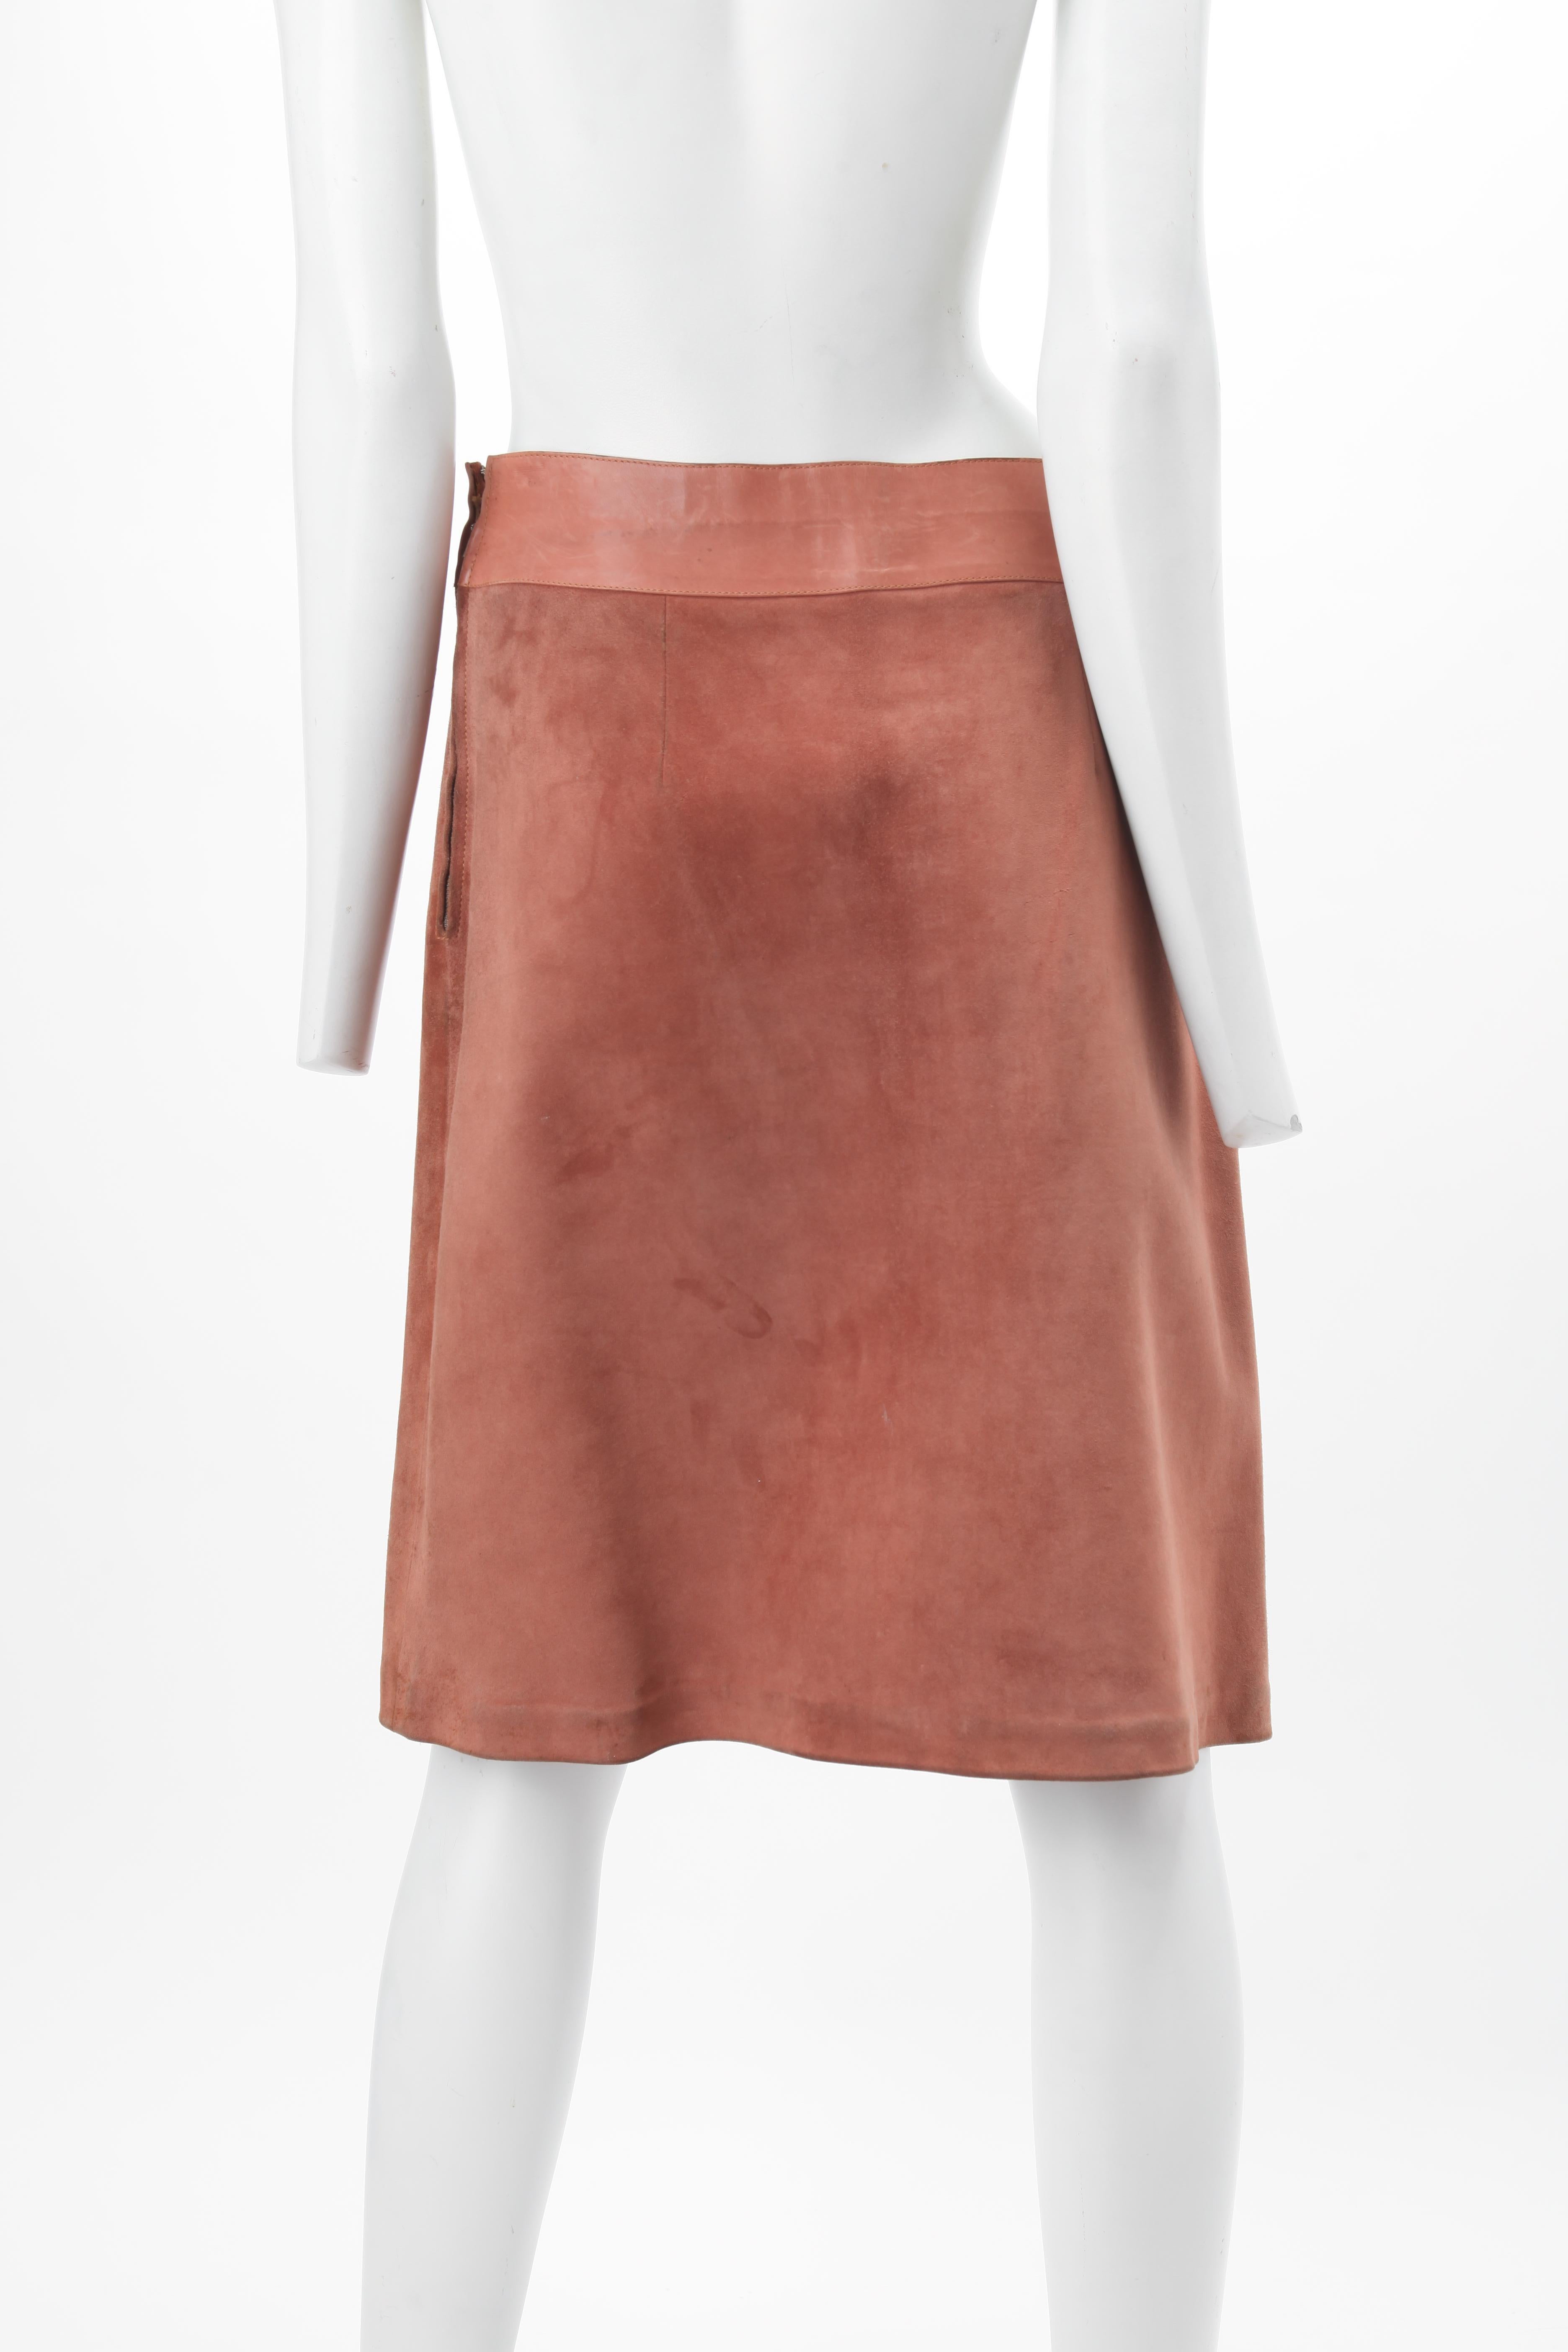 Women's or Men's c.1970s Archival GUCCI Camel Suede A-Line Skirt For Sale